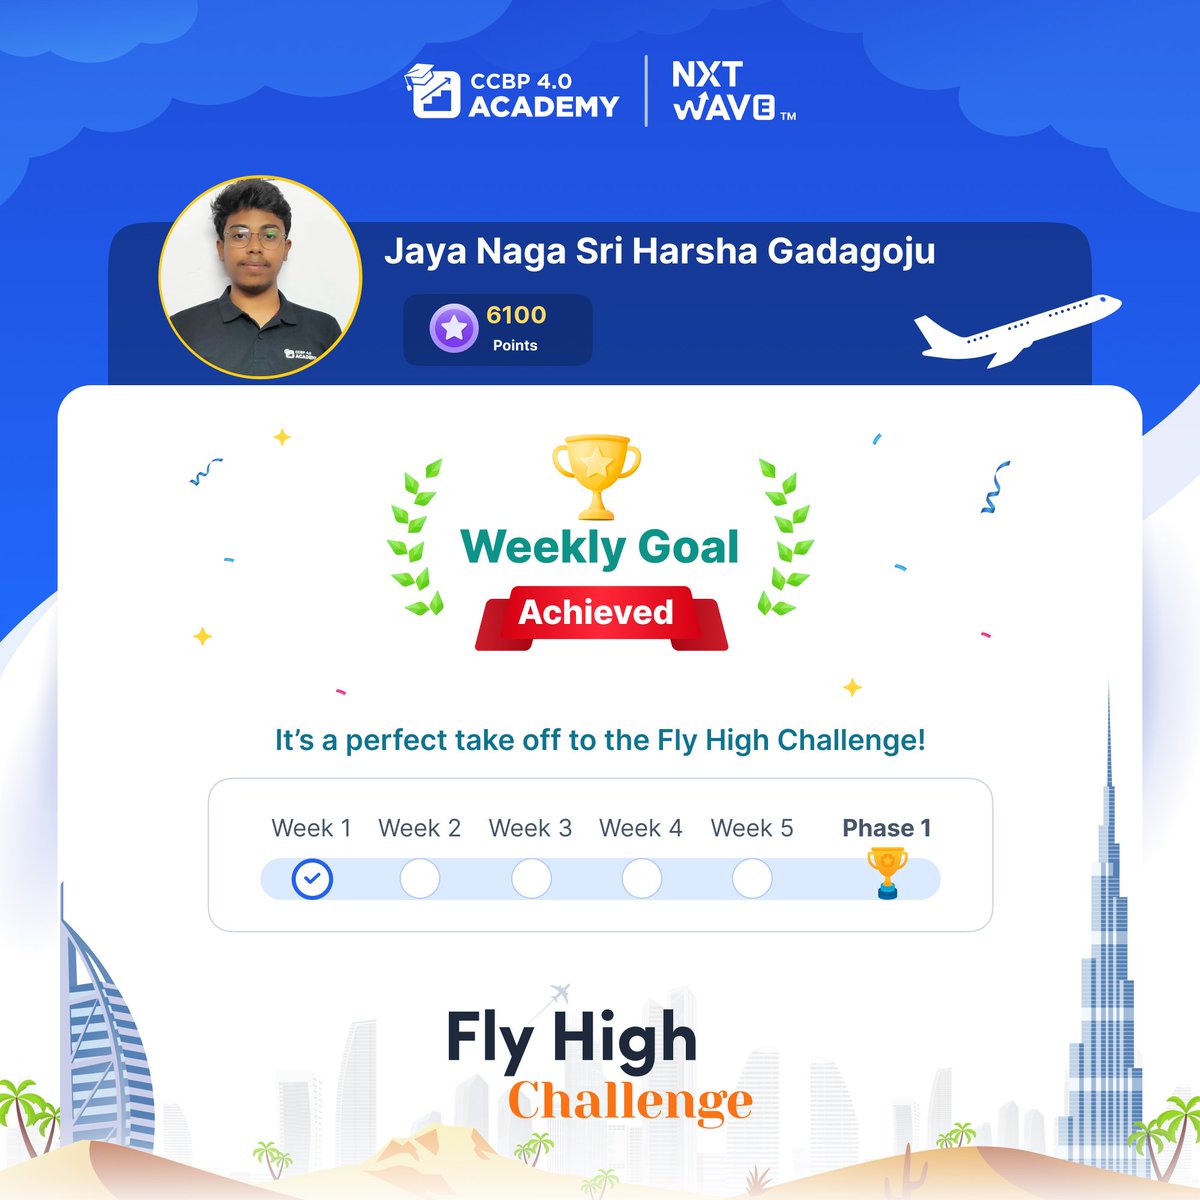 I am happy to say that I have successfully completed my first week goal of #FlyHighChallenge 
@nxtwave_tech.